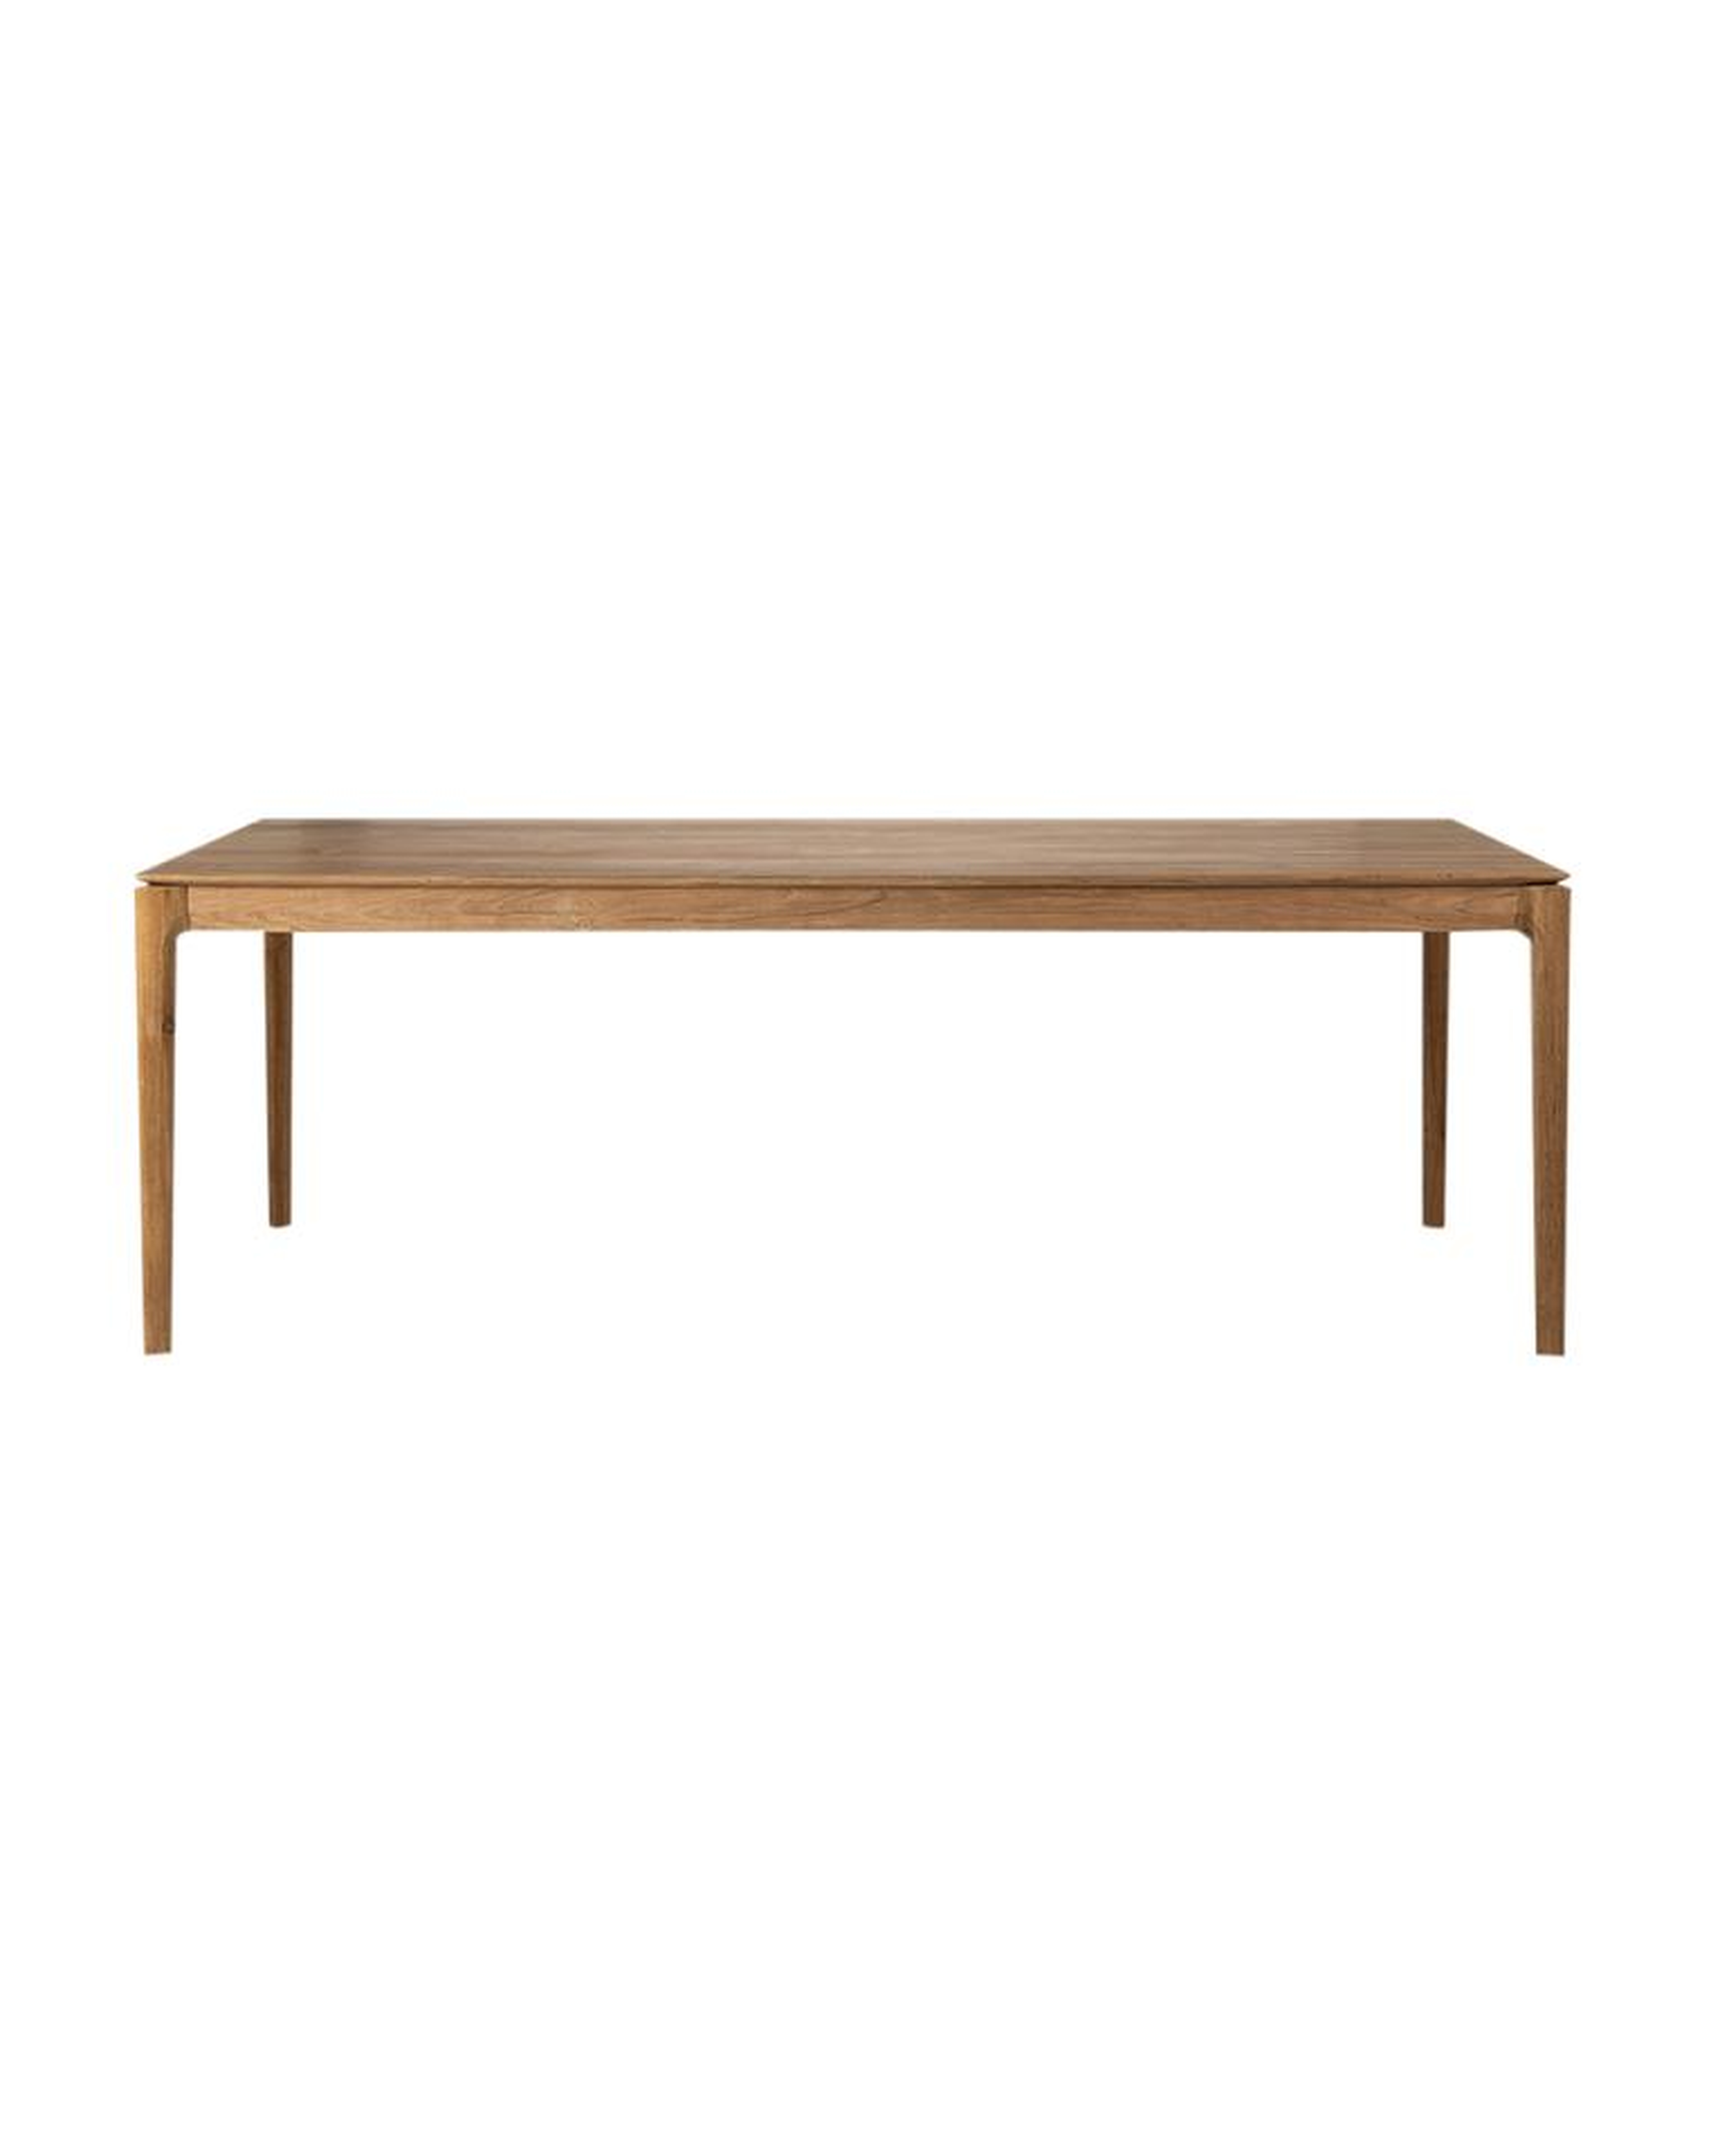 ALEC DINING TABLE - McGee & Co.